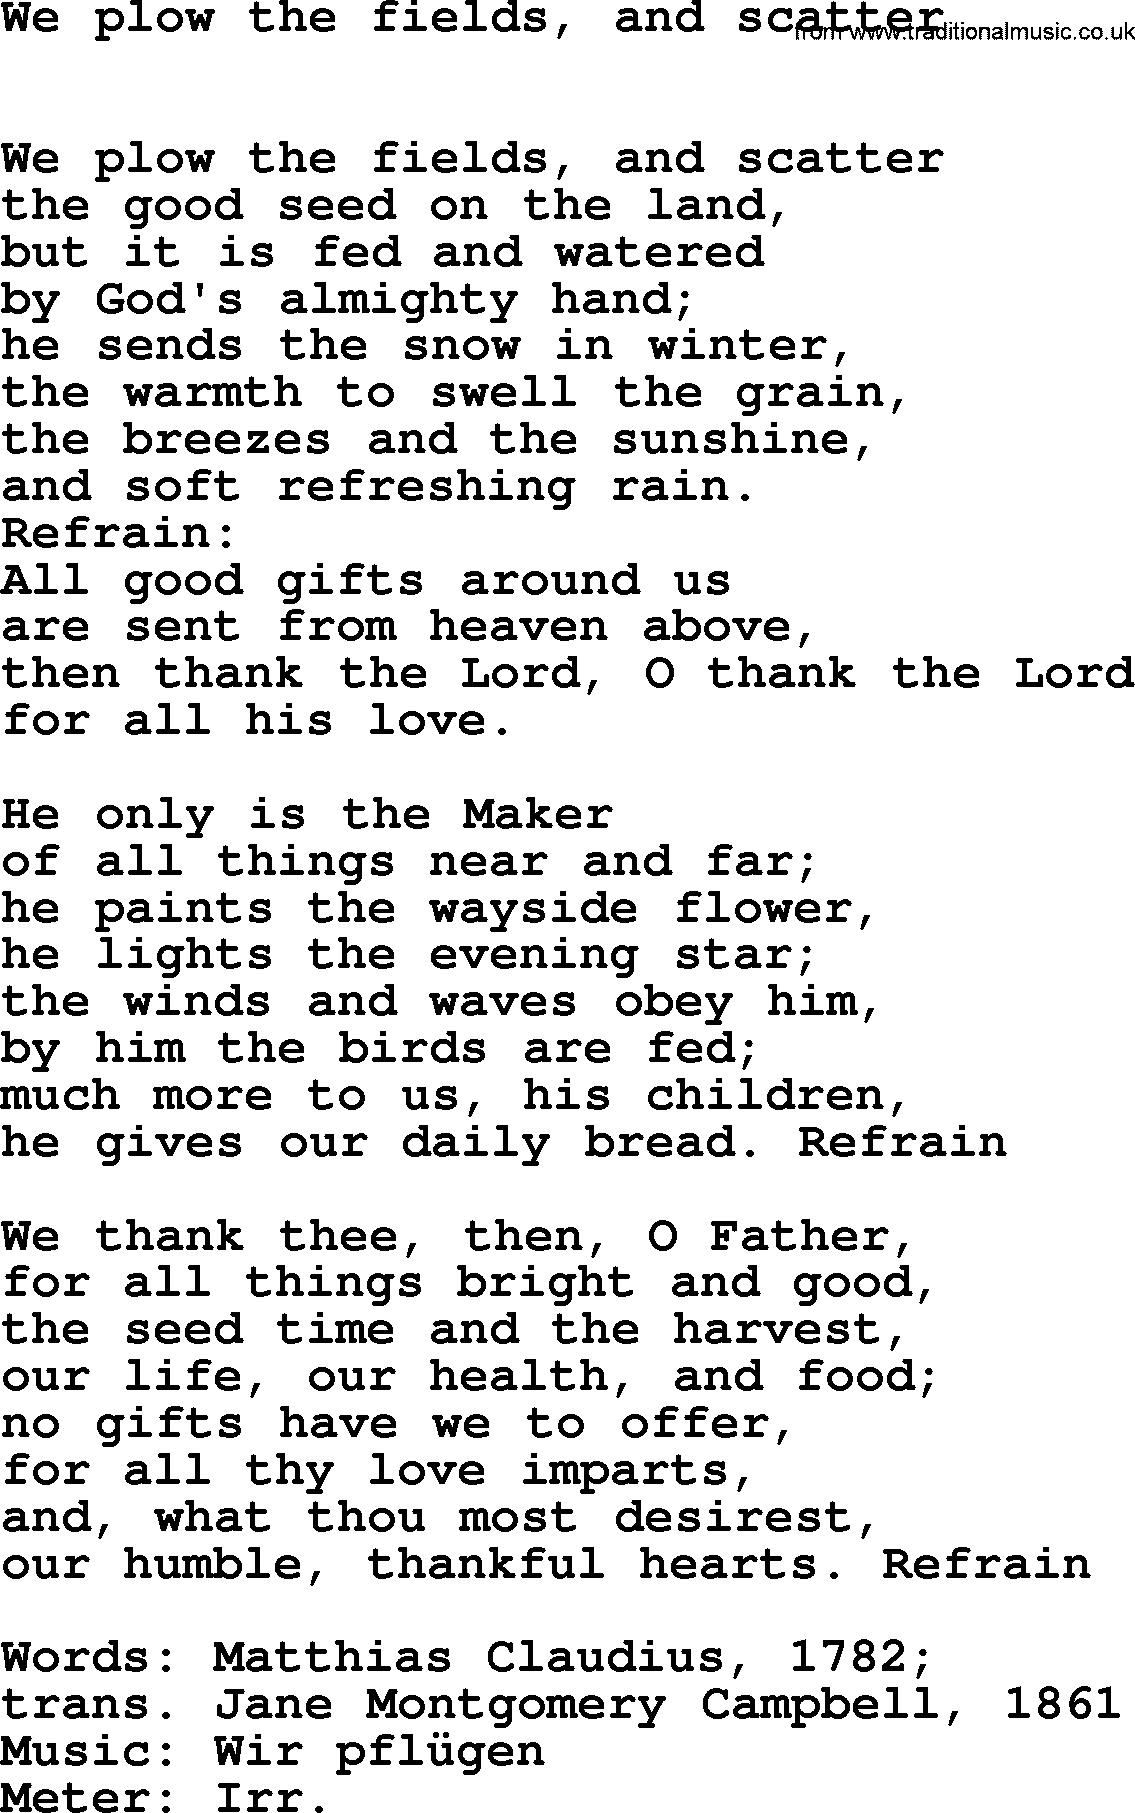 Book of Common Praise Hymn: We Plow The Fields, And Scatter.txt lyrics with midi music